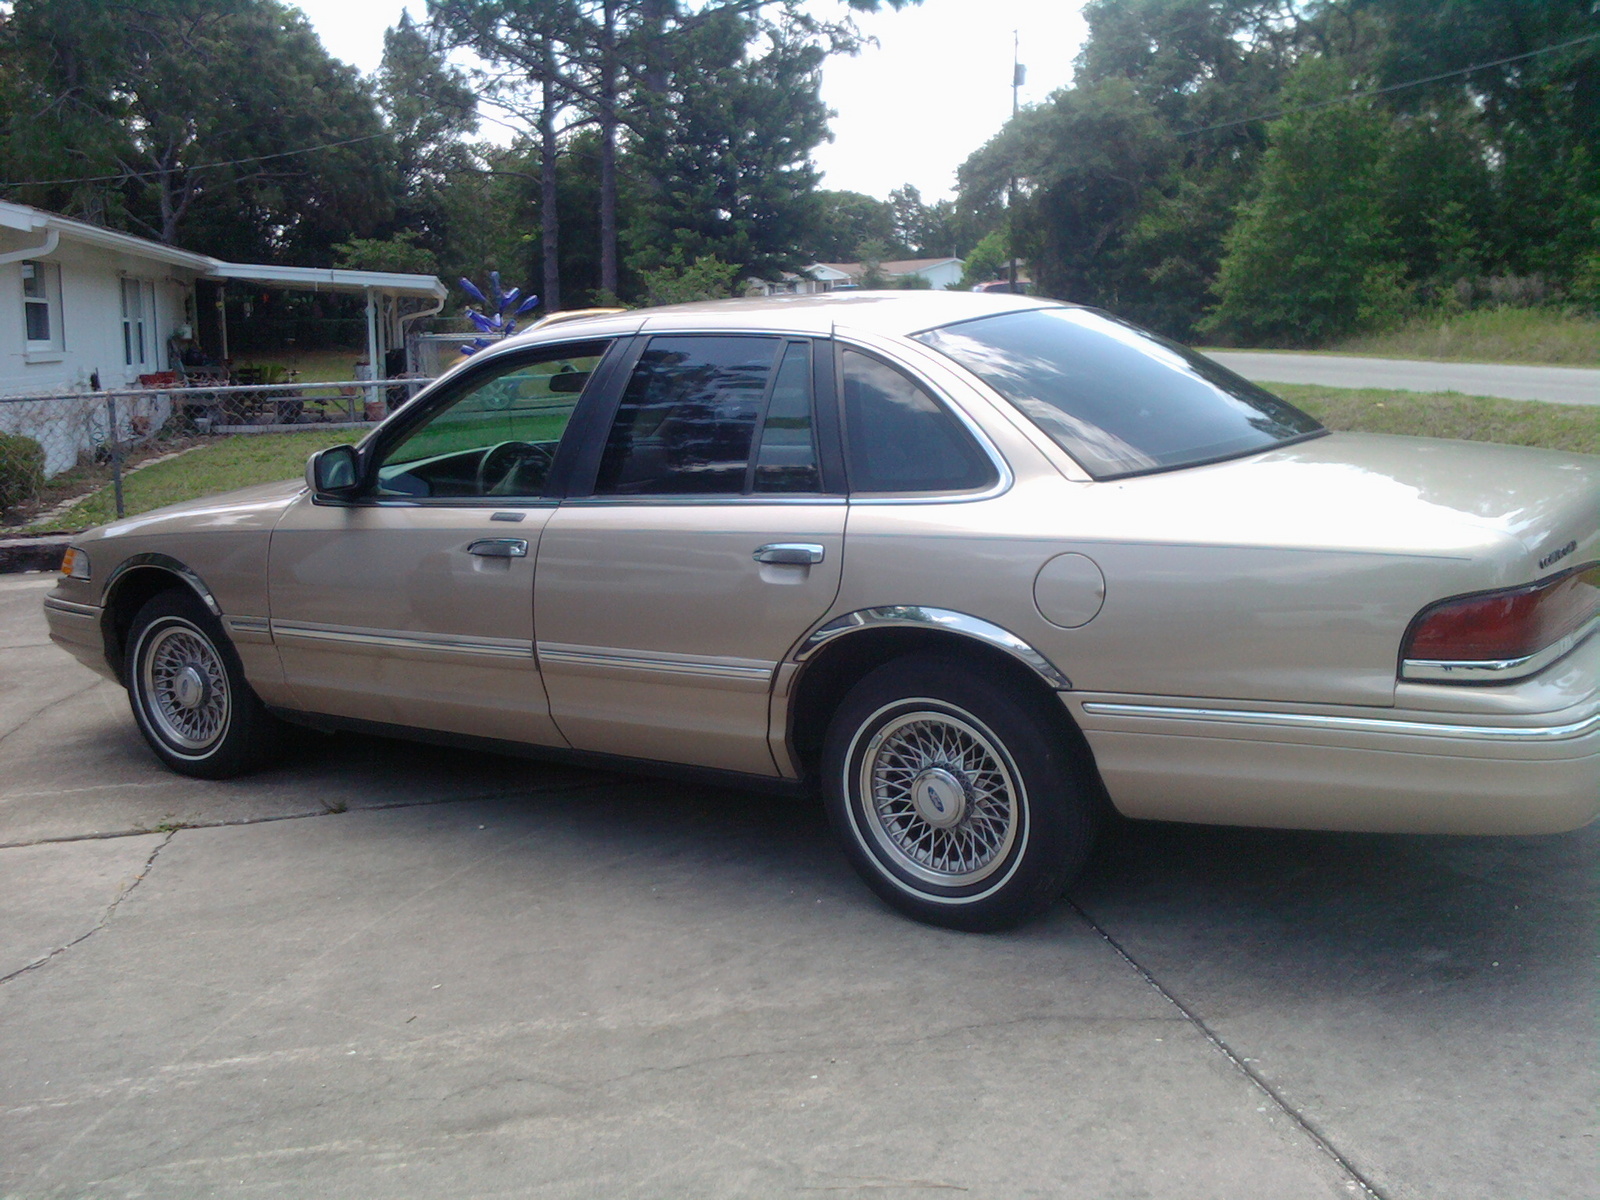 1997 Crown ford picture victoria #1